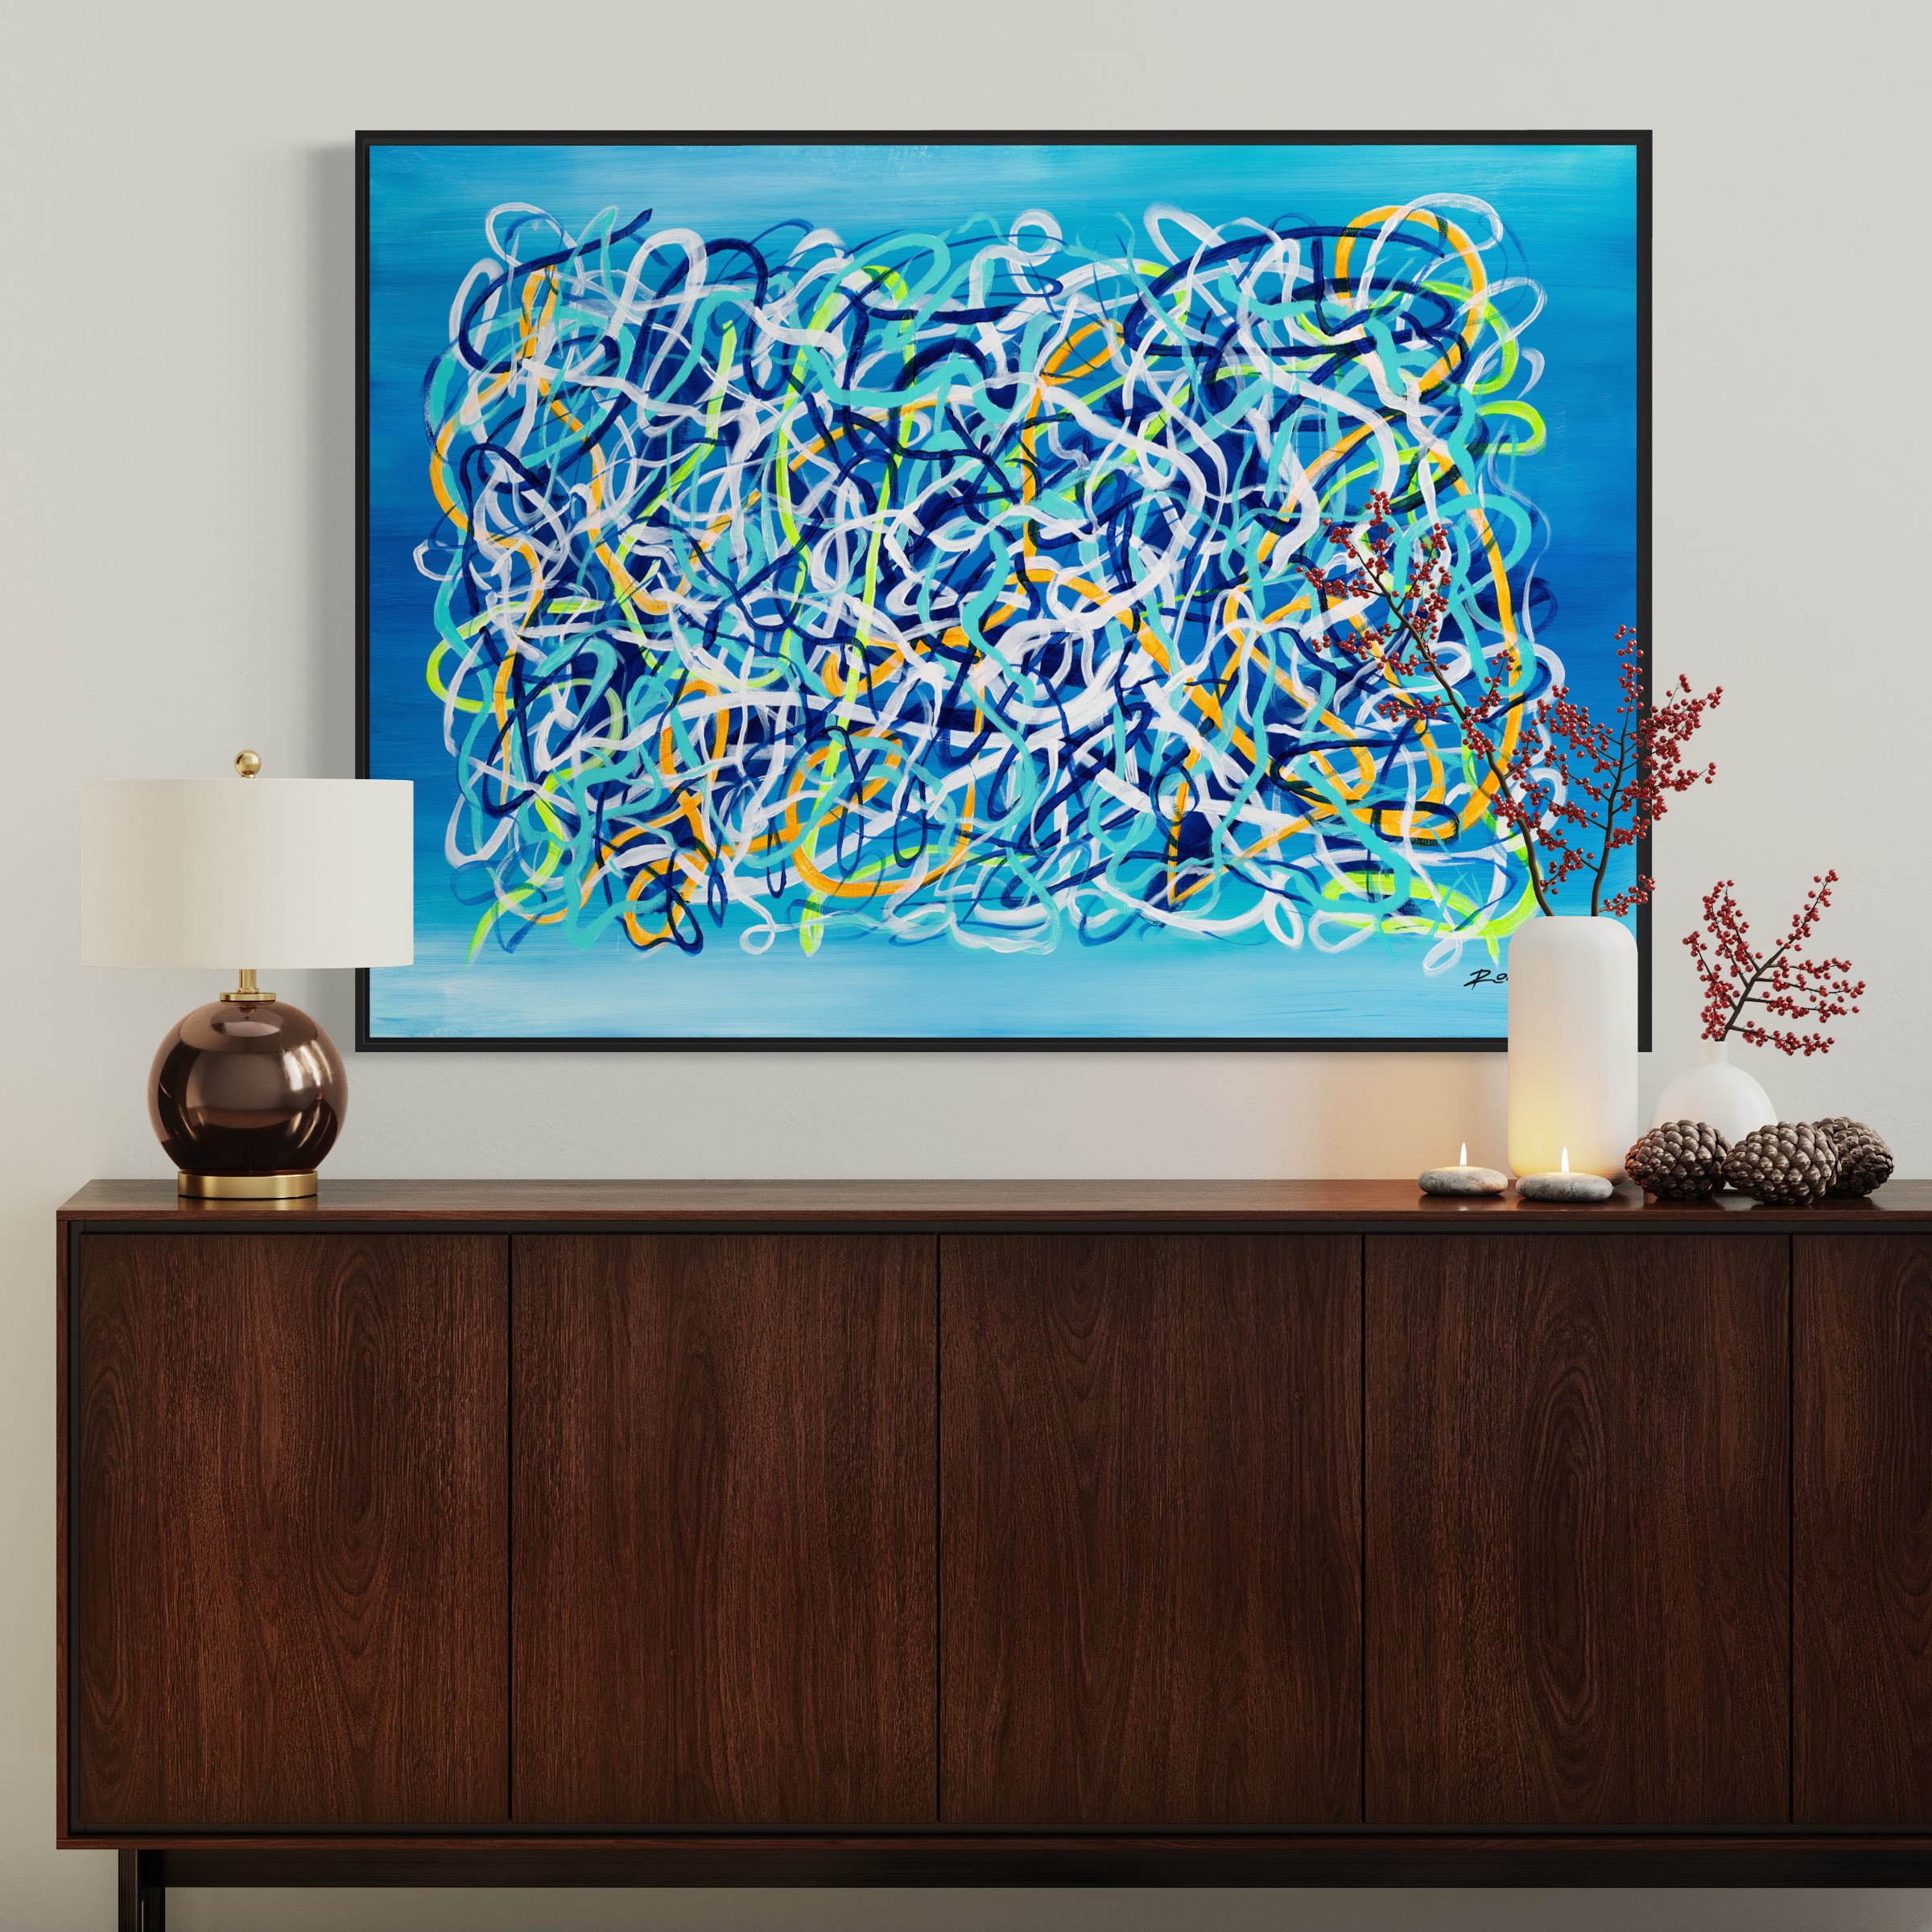 blue-lines-abstract-painting-handmade-original-art-on-canvas-by-ron-deri-9